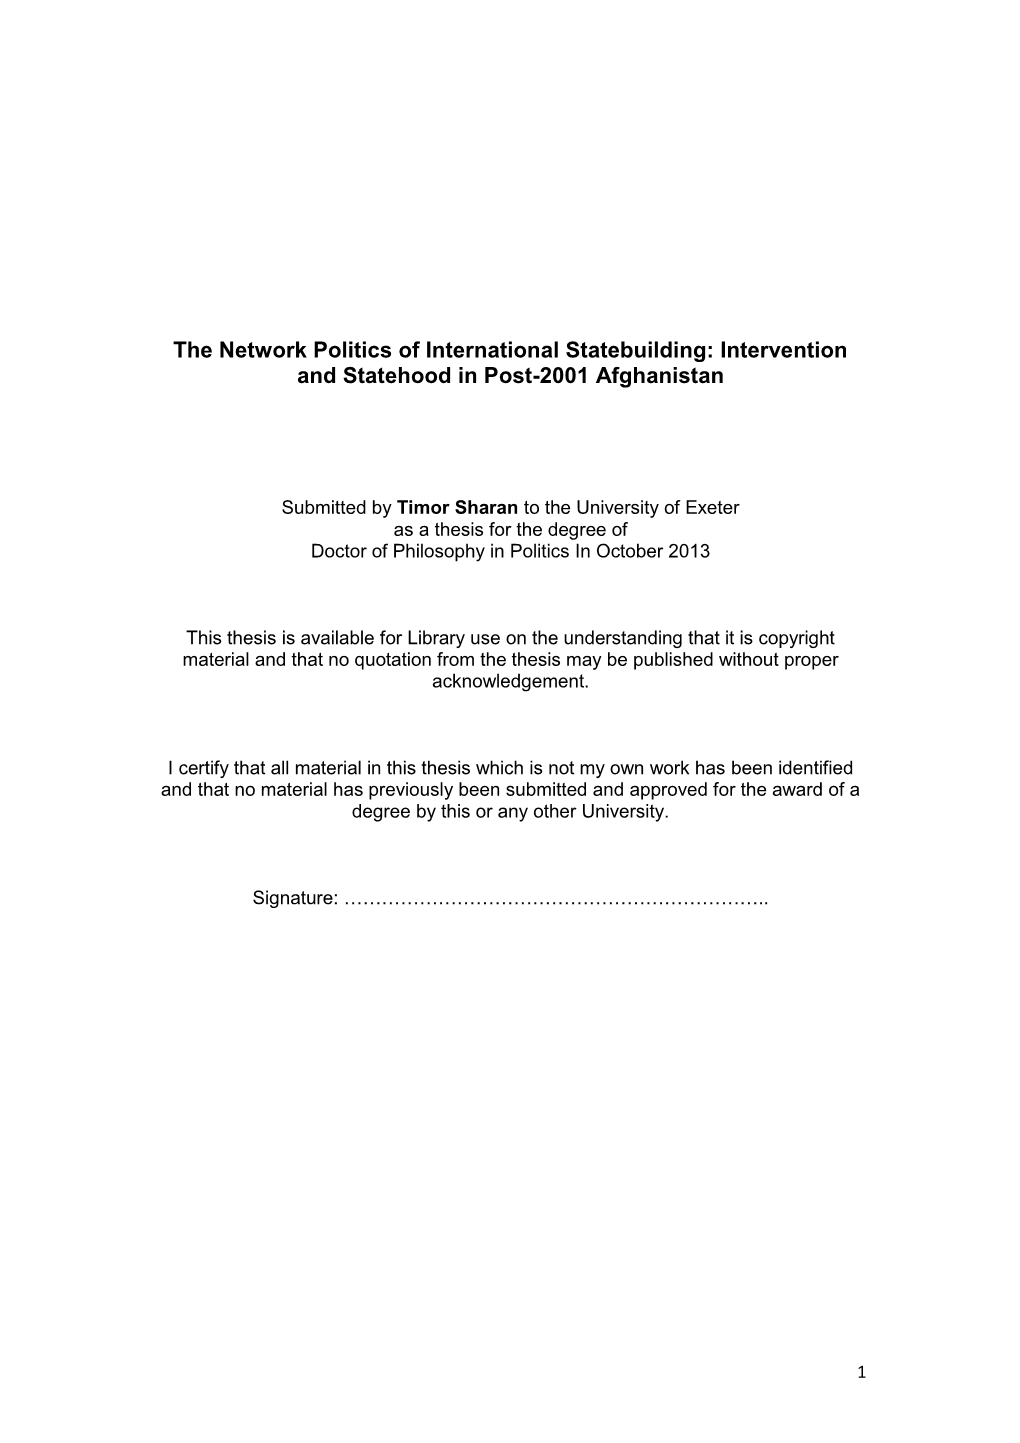 The Network Politics of International Statebuilding: Intervention and Statehood in Post-2001 Afghanistan